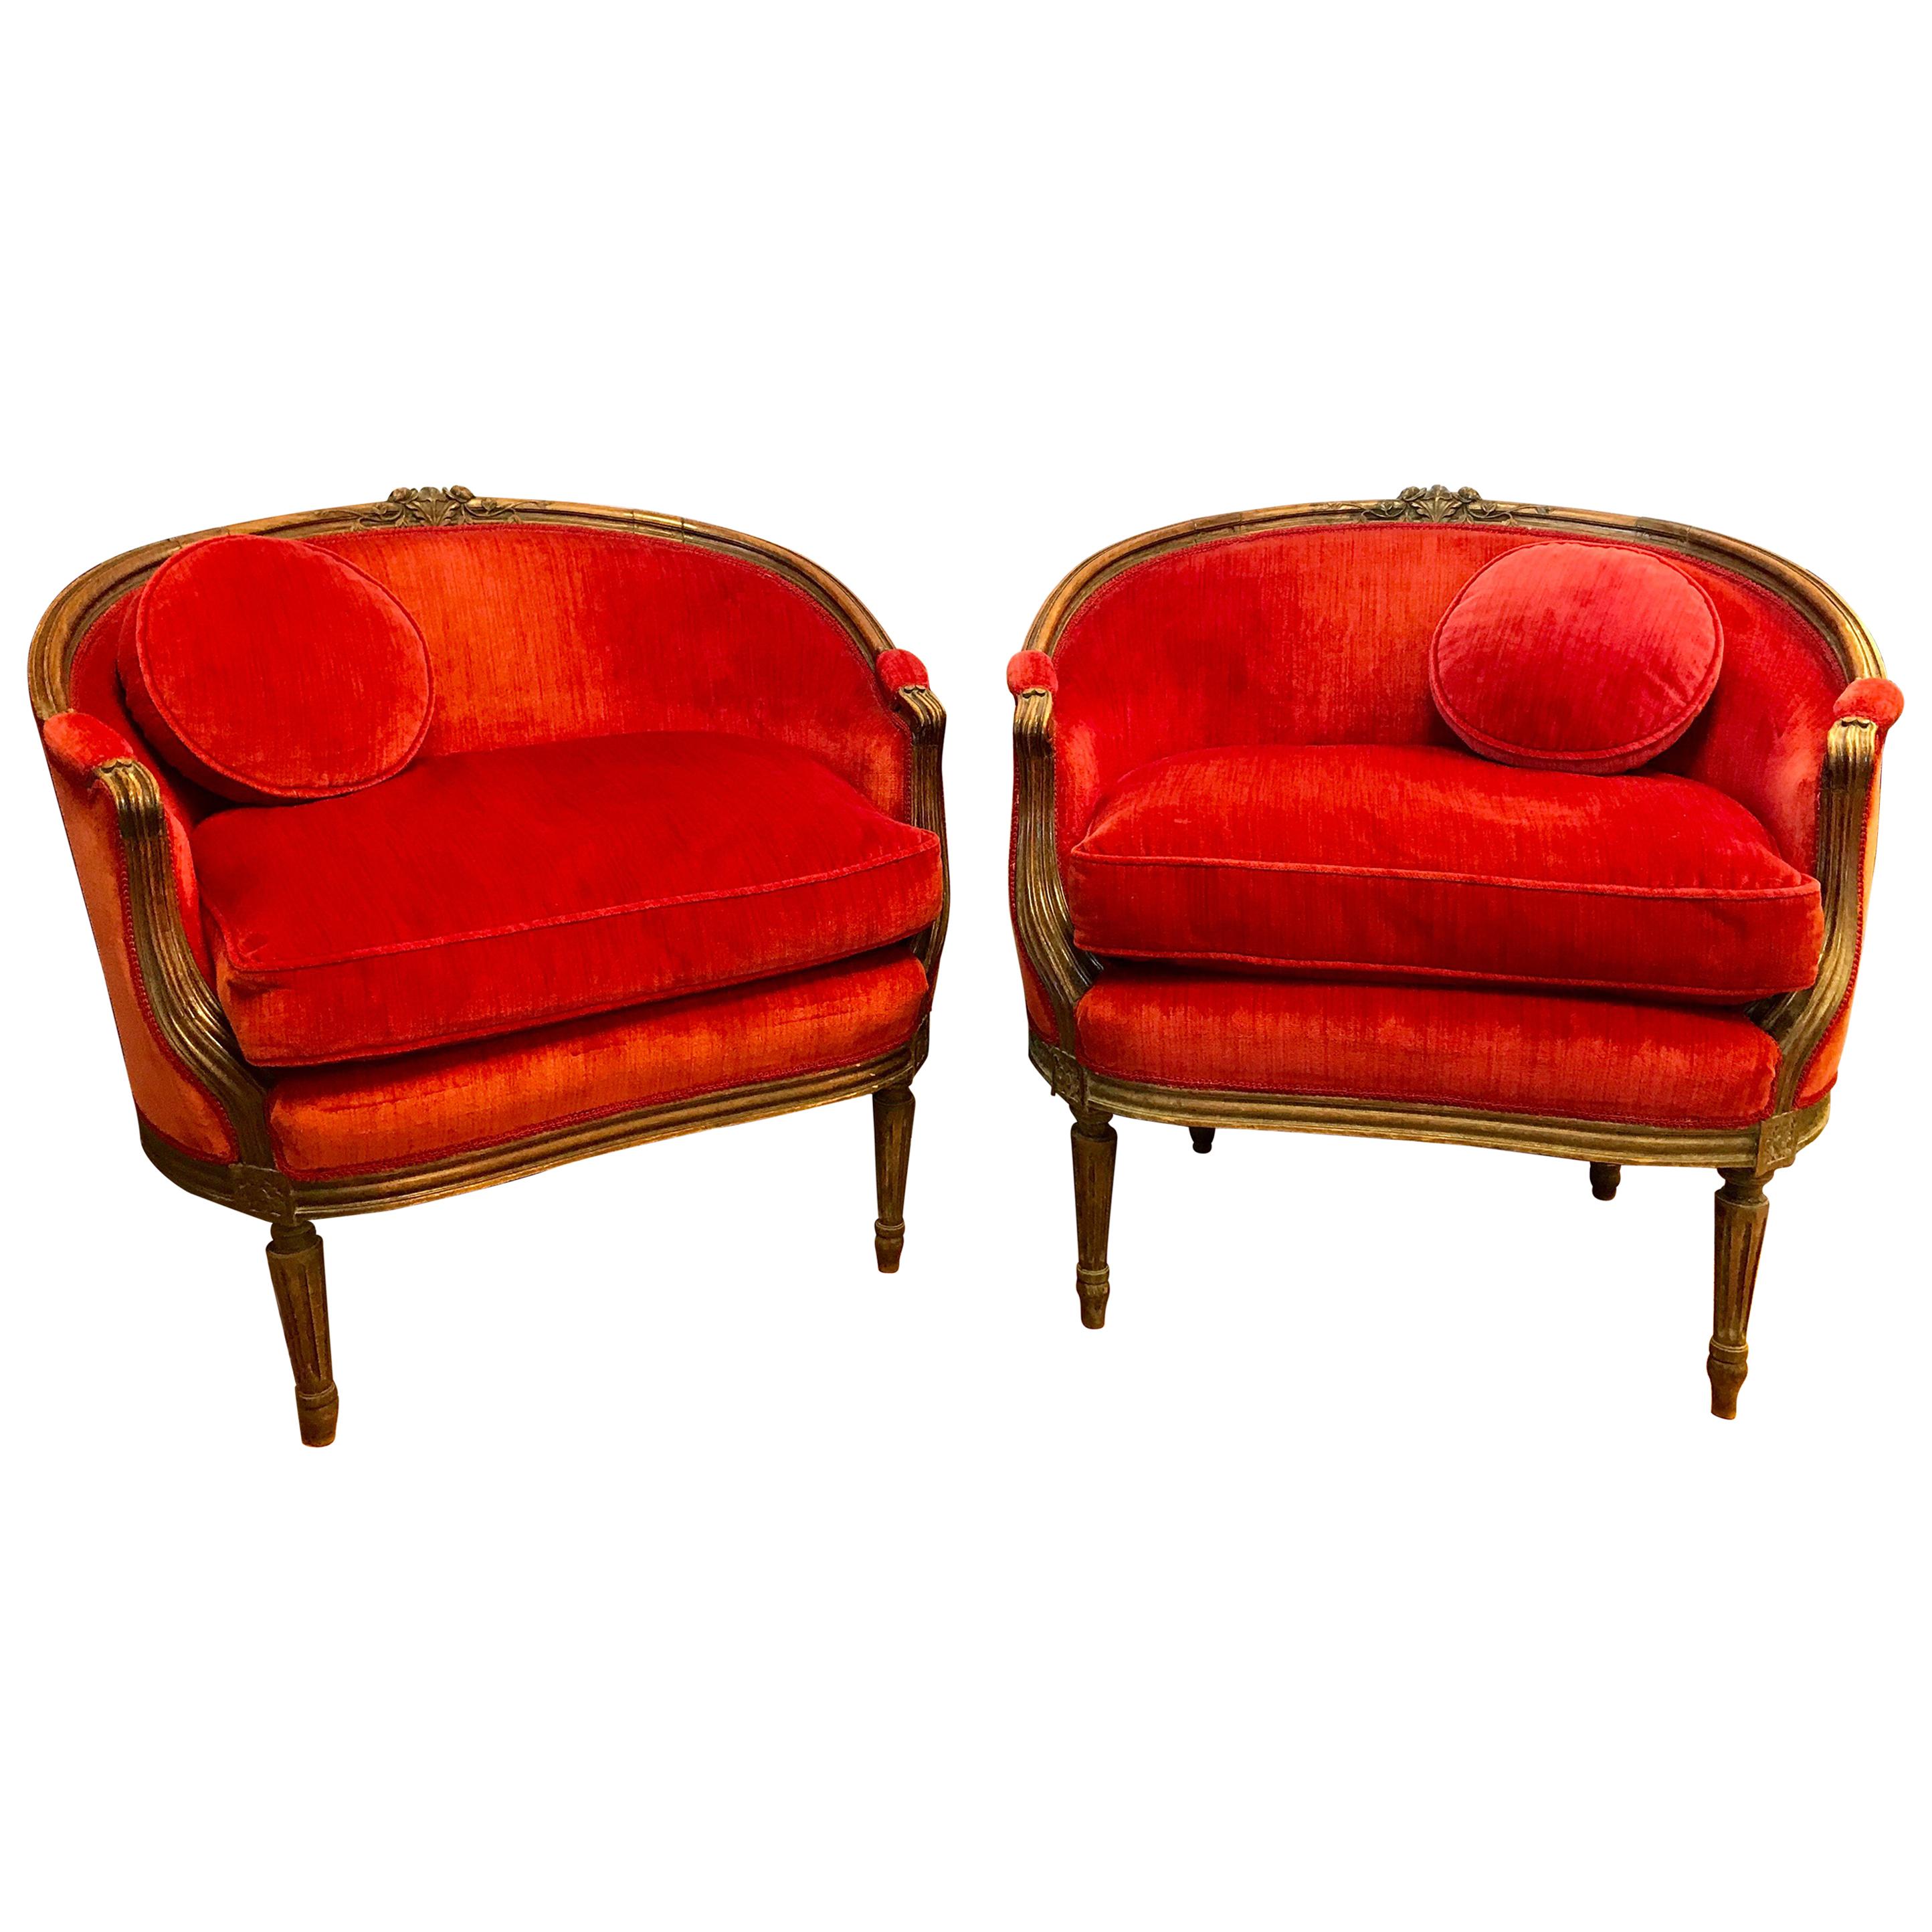 Pair of Belle Époque French Louis XV Style Red Velvet Bergeres Chairs Armchairs